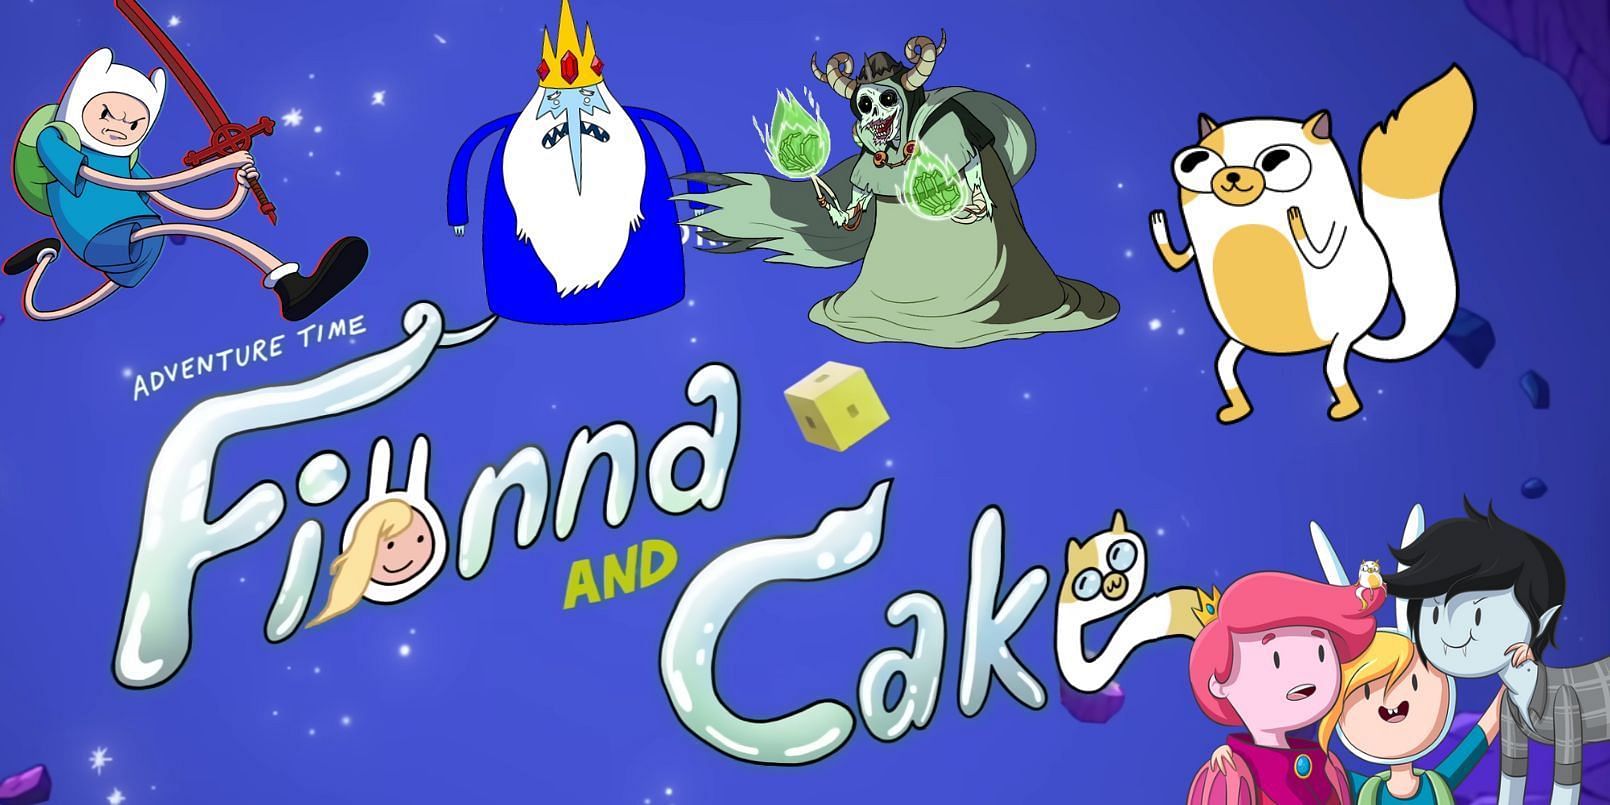 Adventure Time Fionna and cake are set to debut their finale this week